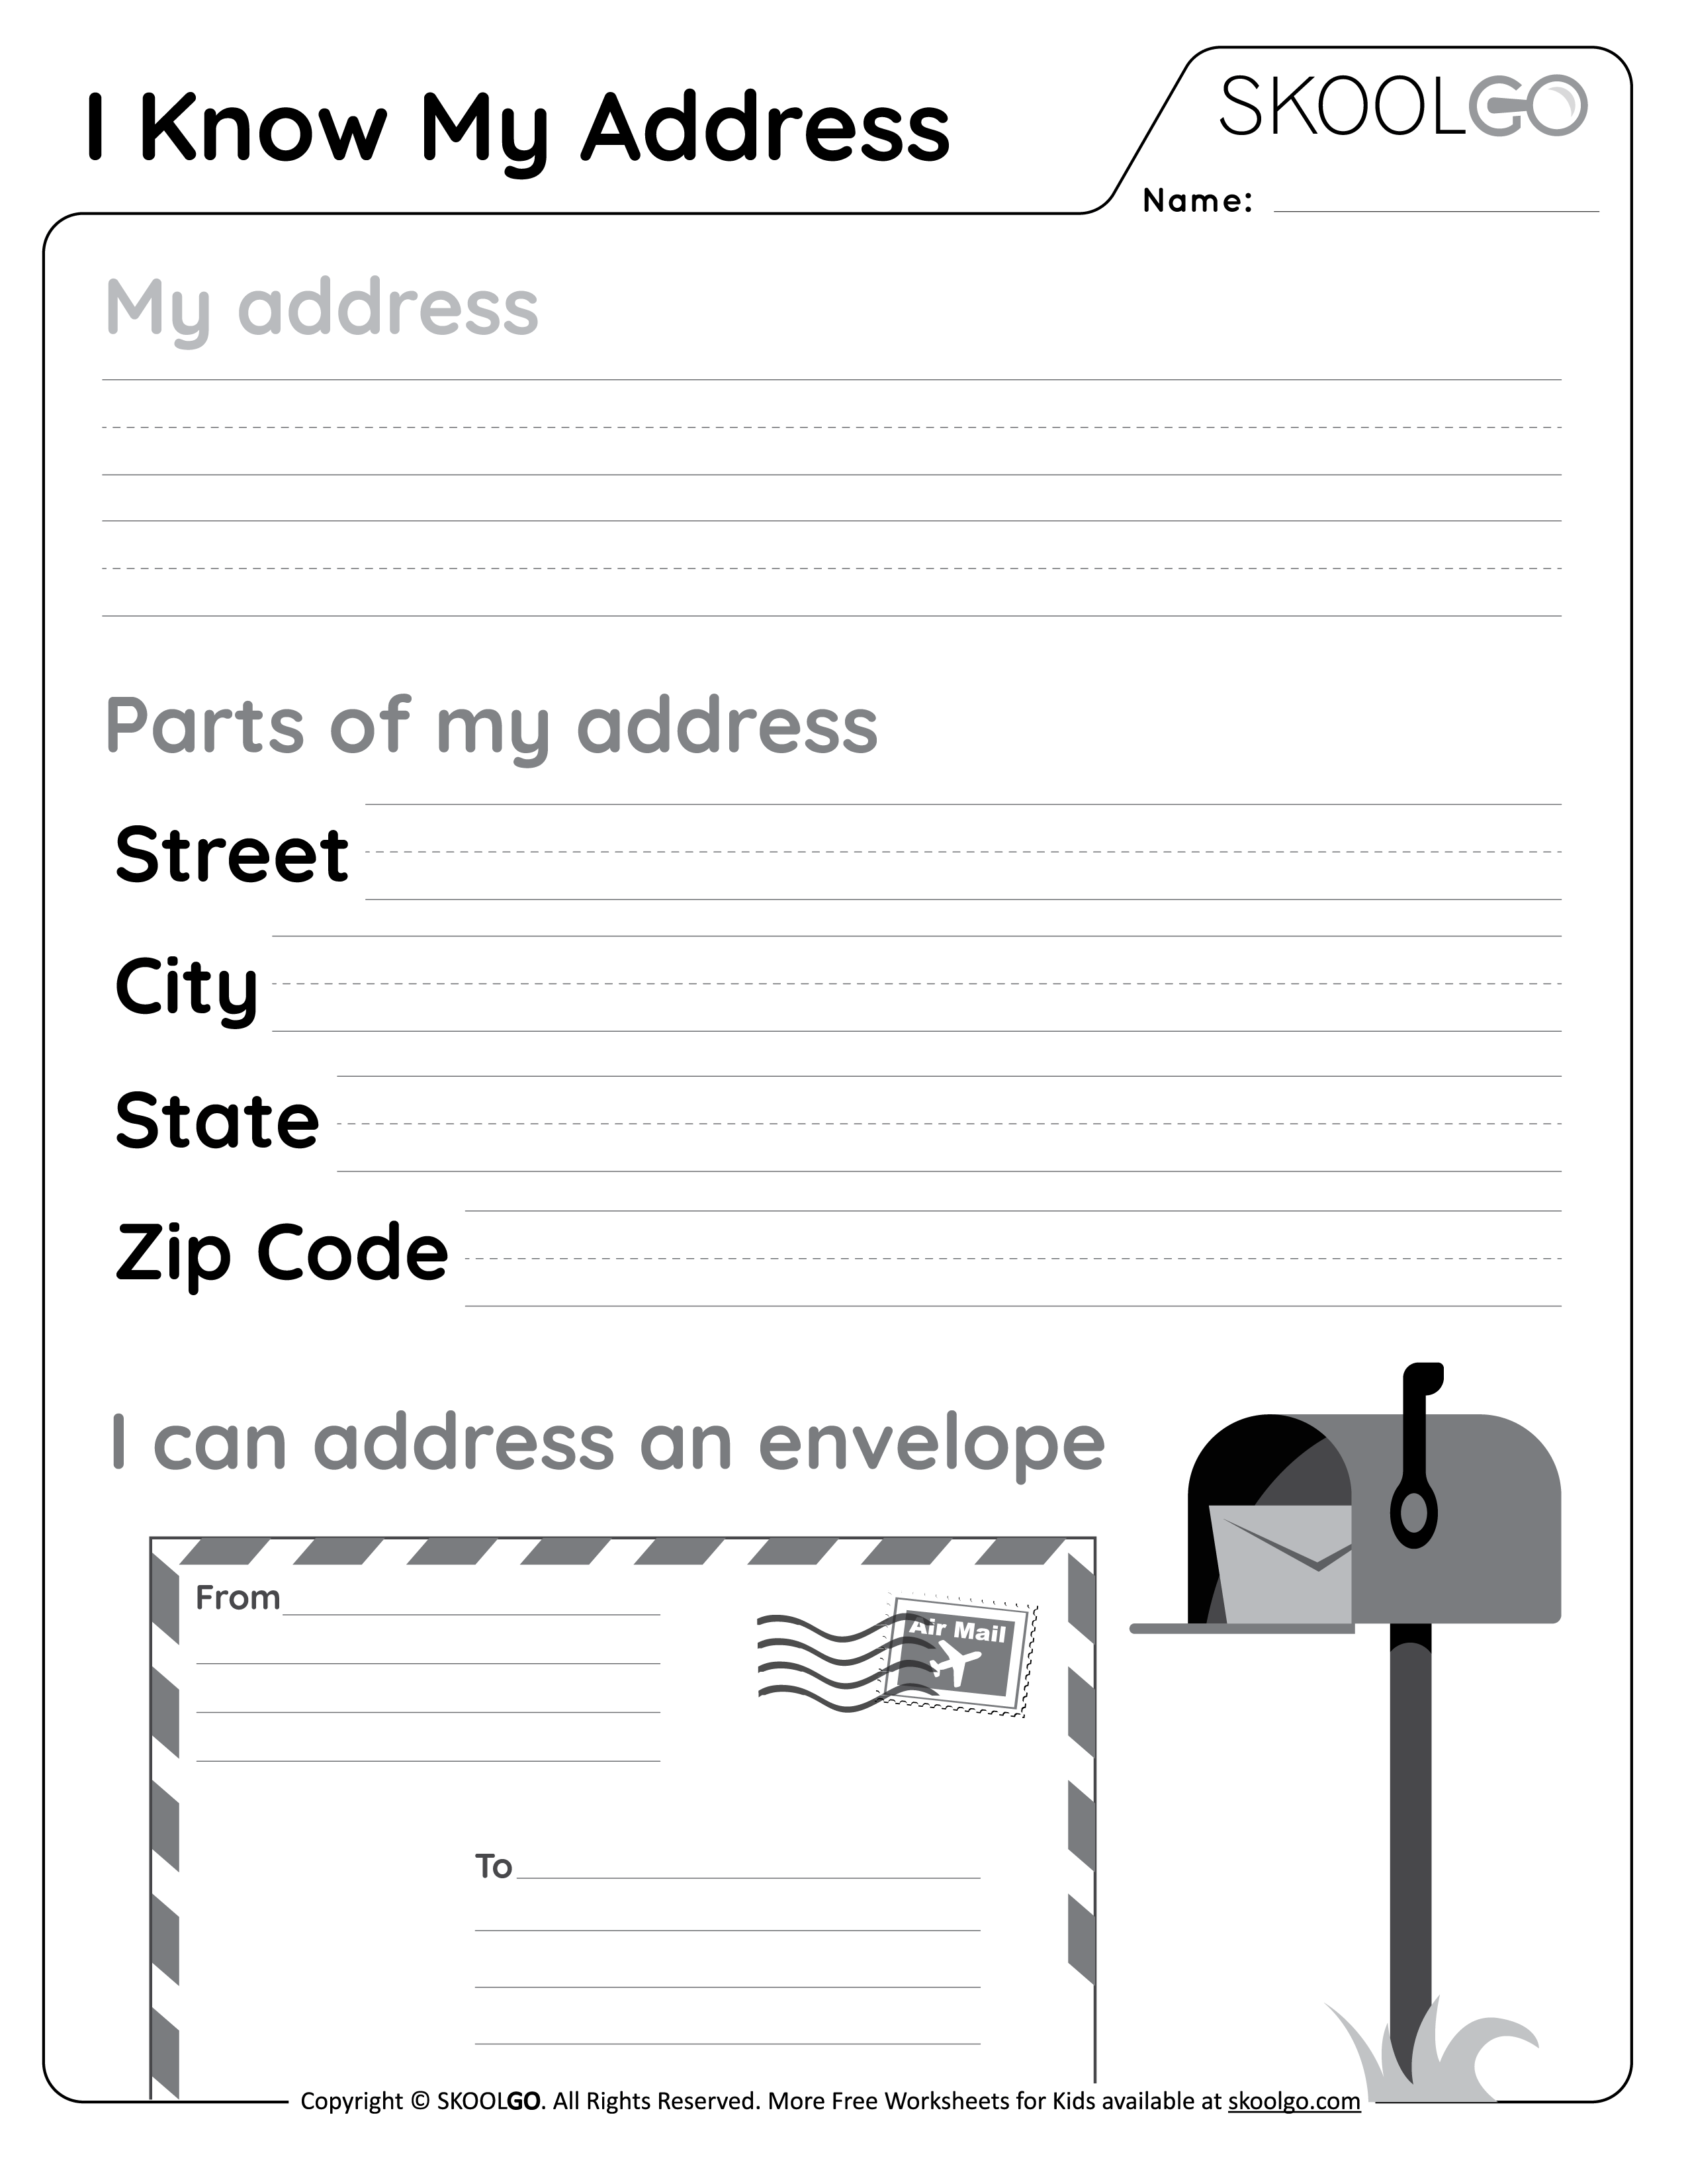 I Know My Address - Free Worksheet for Kids - Black and White